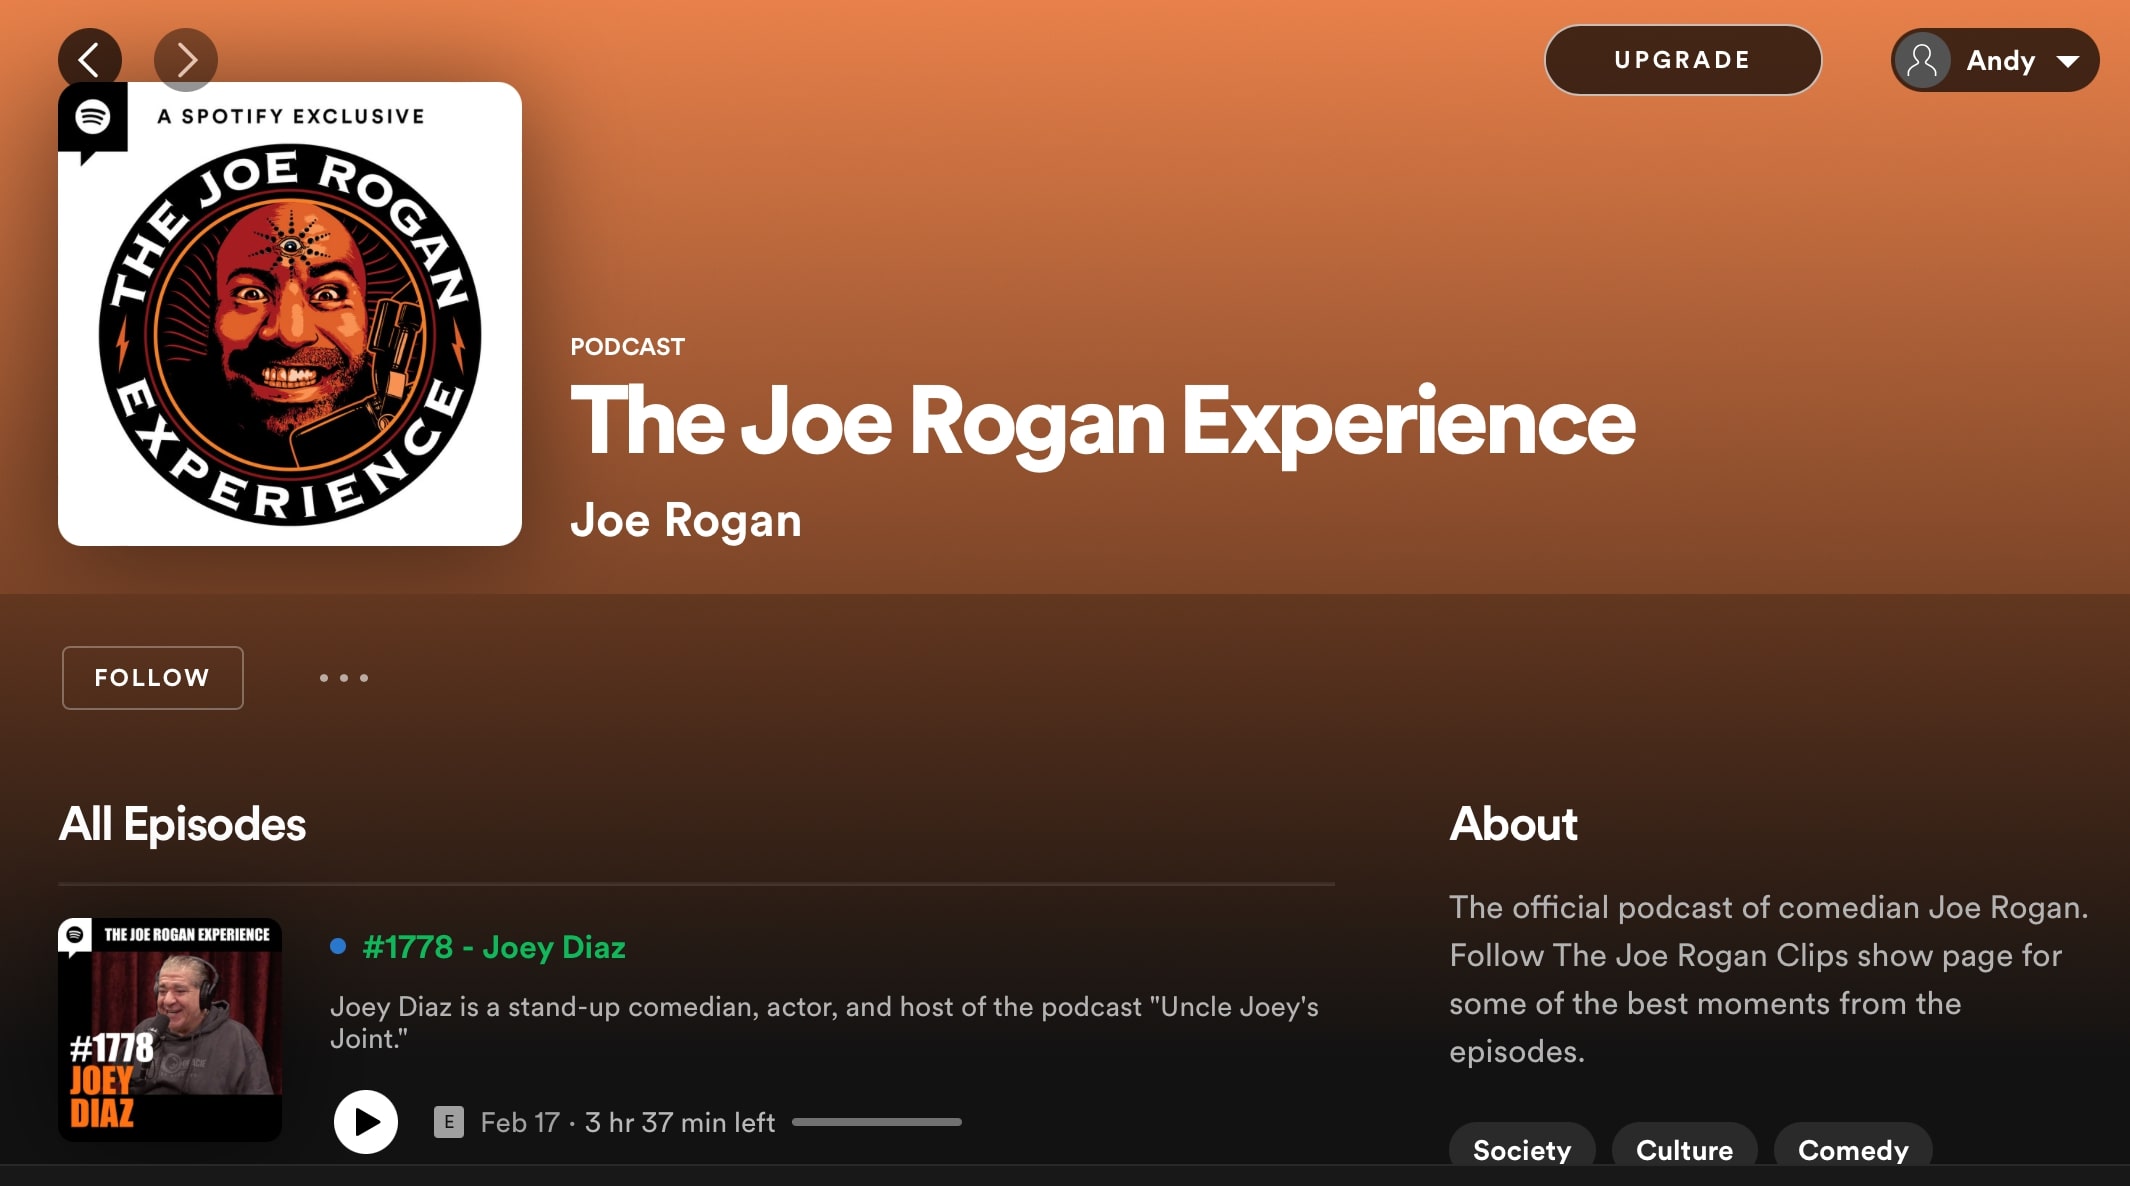 A podcast just recapping the Joe Rogan podcast is huge right now